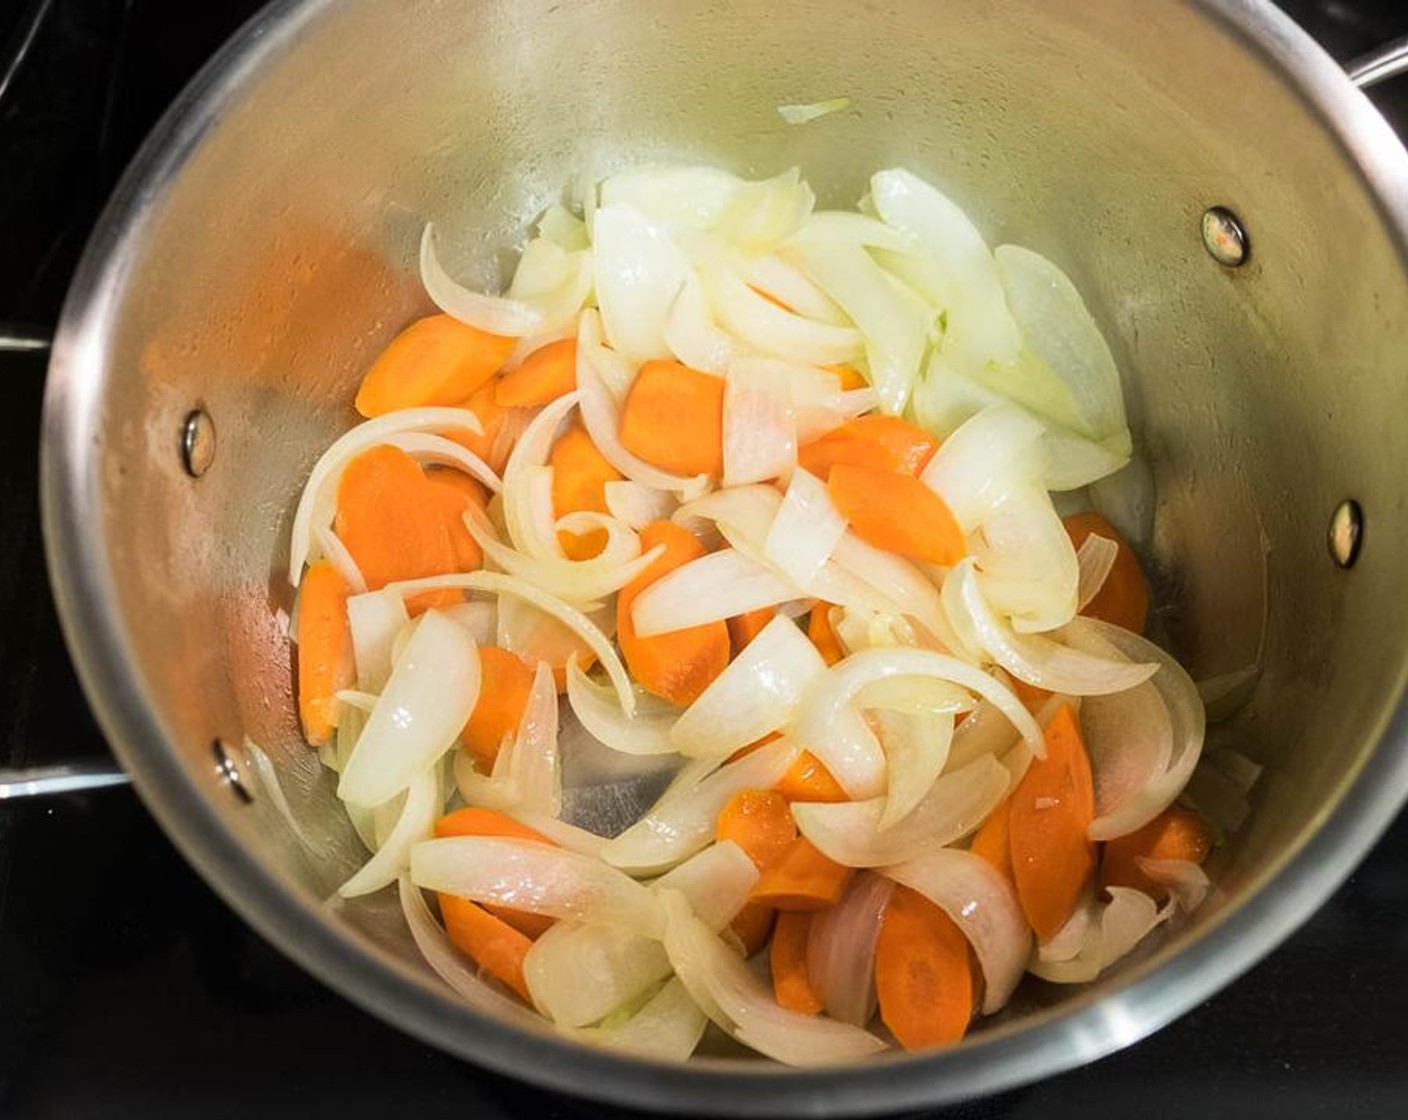 step 6 While waiting the oxtail to cool, heat the big pot - from step 1 - with Olive Oil (2 Tbsp) over medium heat. Add Onion (1) and Carrots (4). Sprinkle with Coarse Sea Salt (1 tsp). Cook and stir until the onion softens, 10 to 15 minutes.